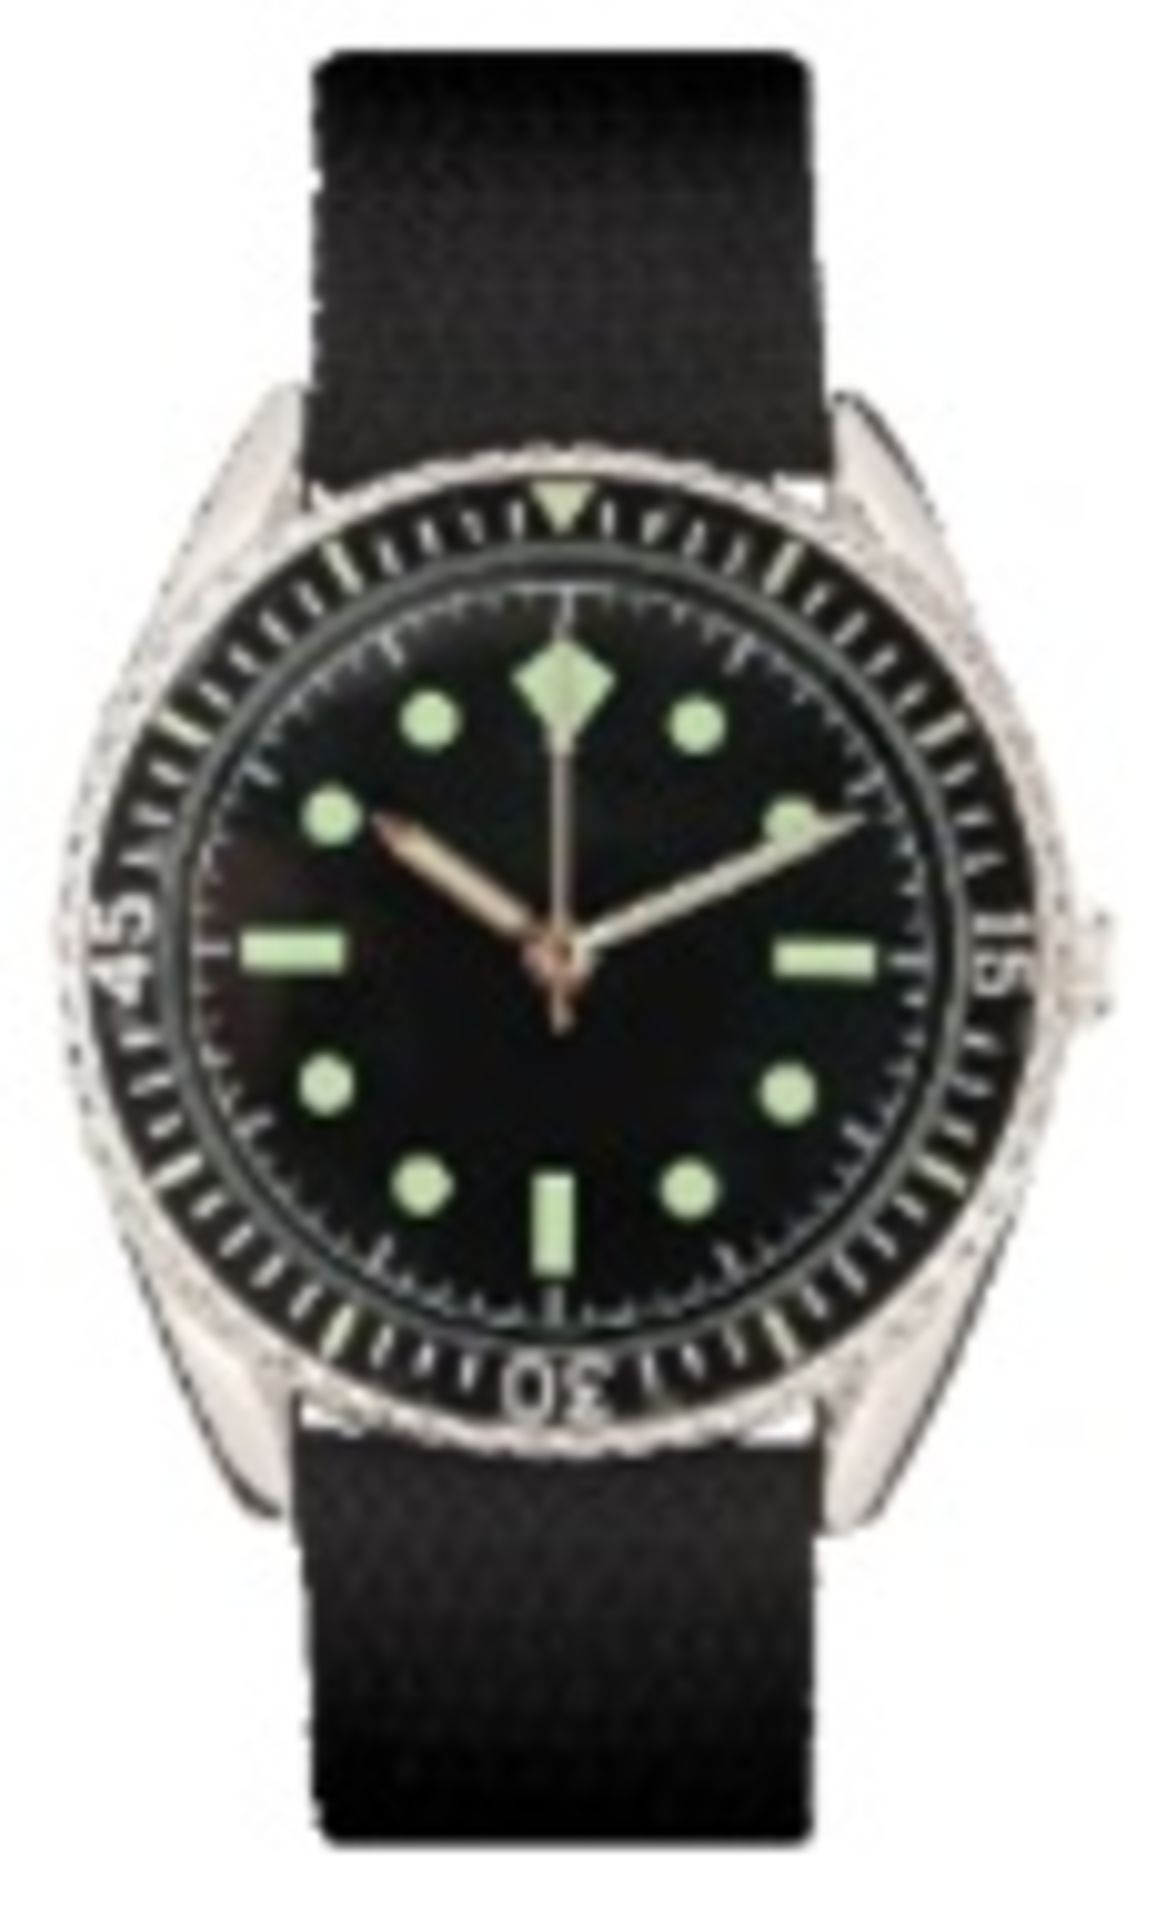 V Brand New Gents 1960s German Naval Commando Watch with Engraved Back in Presentation Box